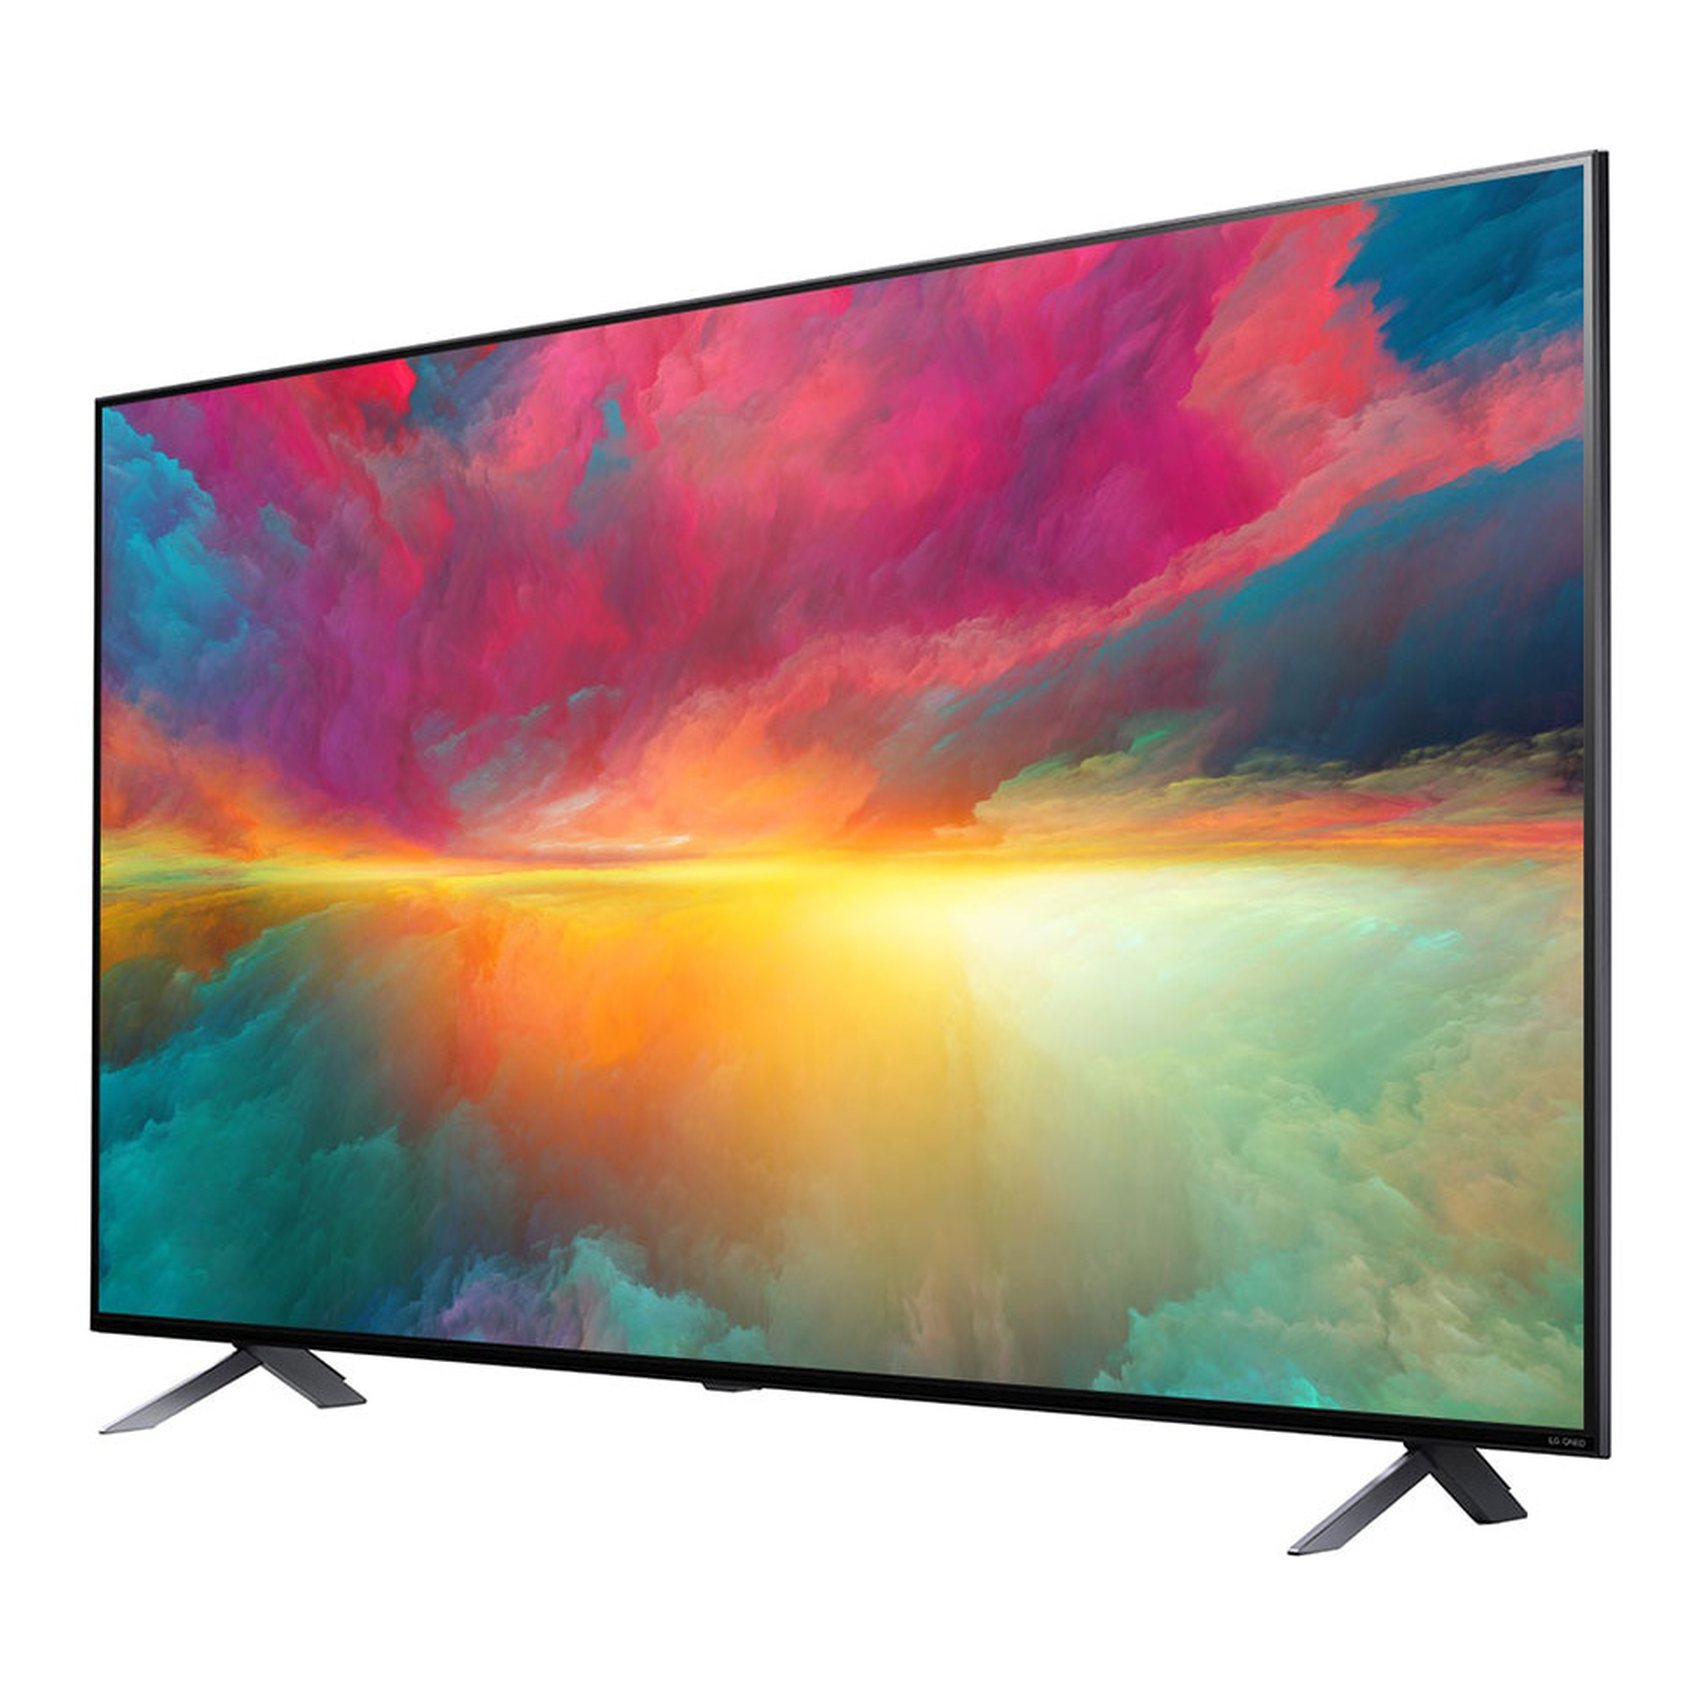 LG 65-inch 4K QNED Smart LED TV QNED756RB Black